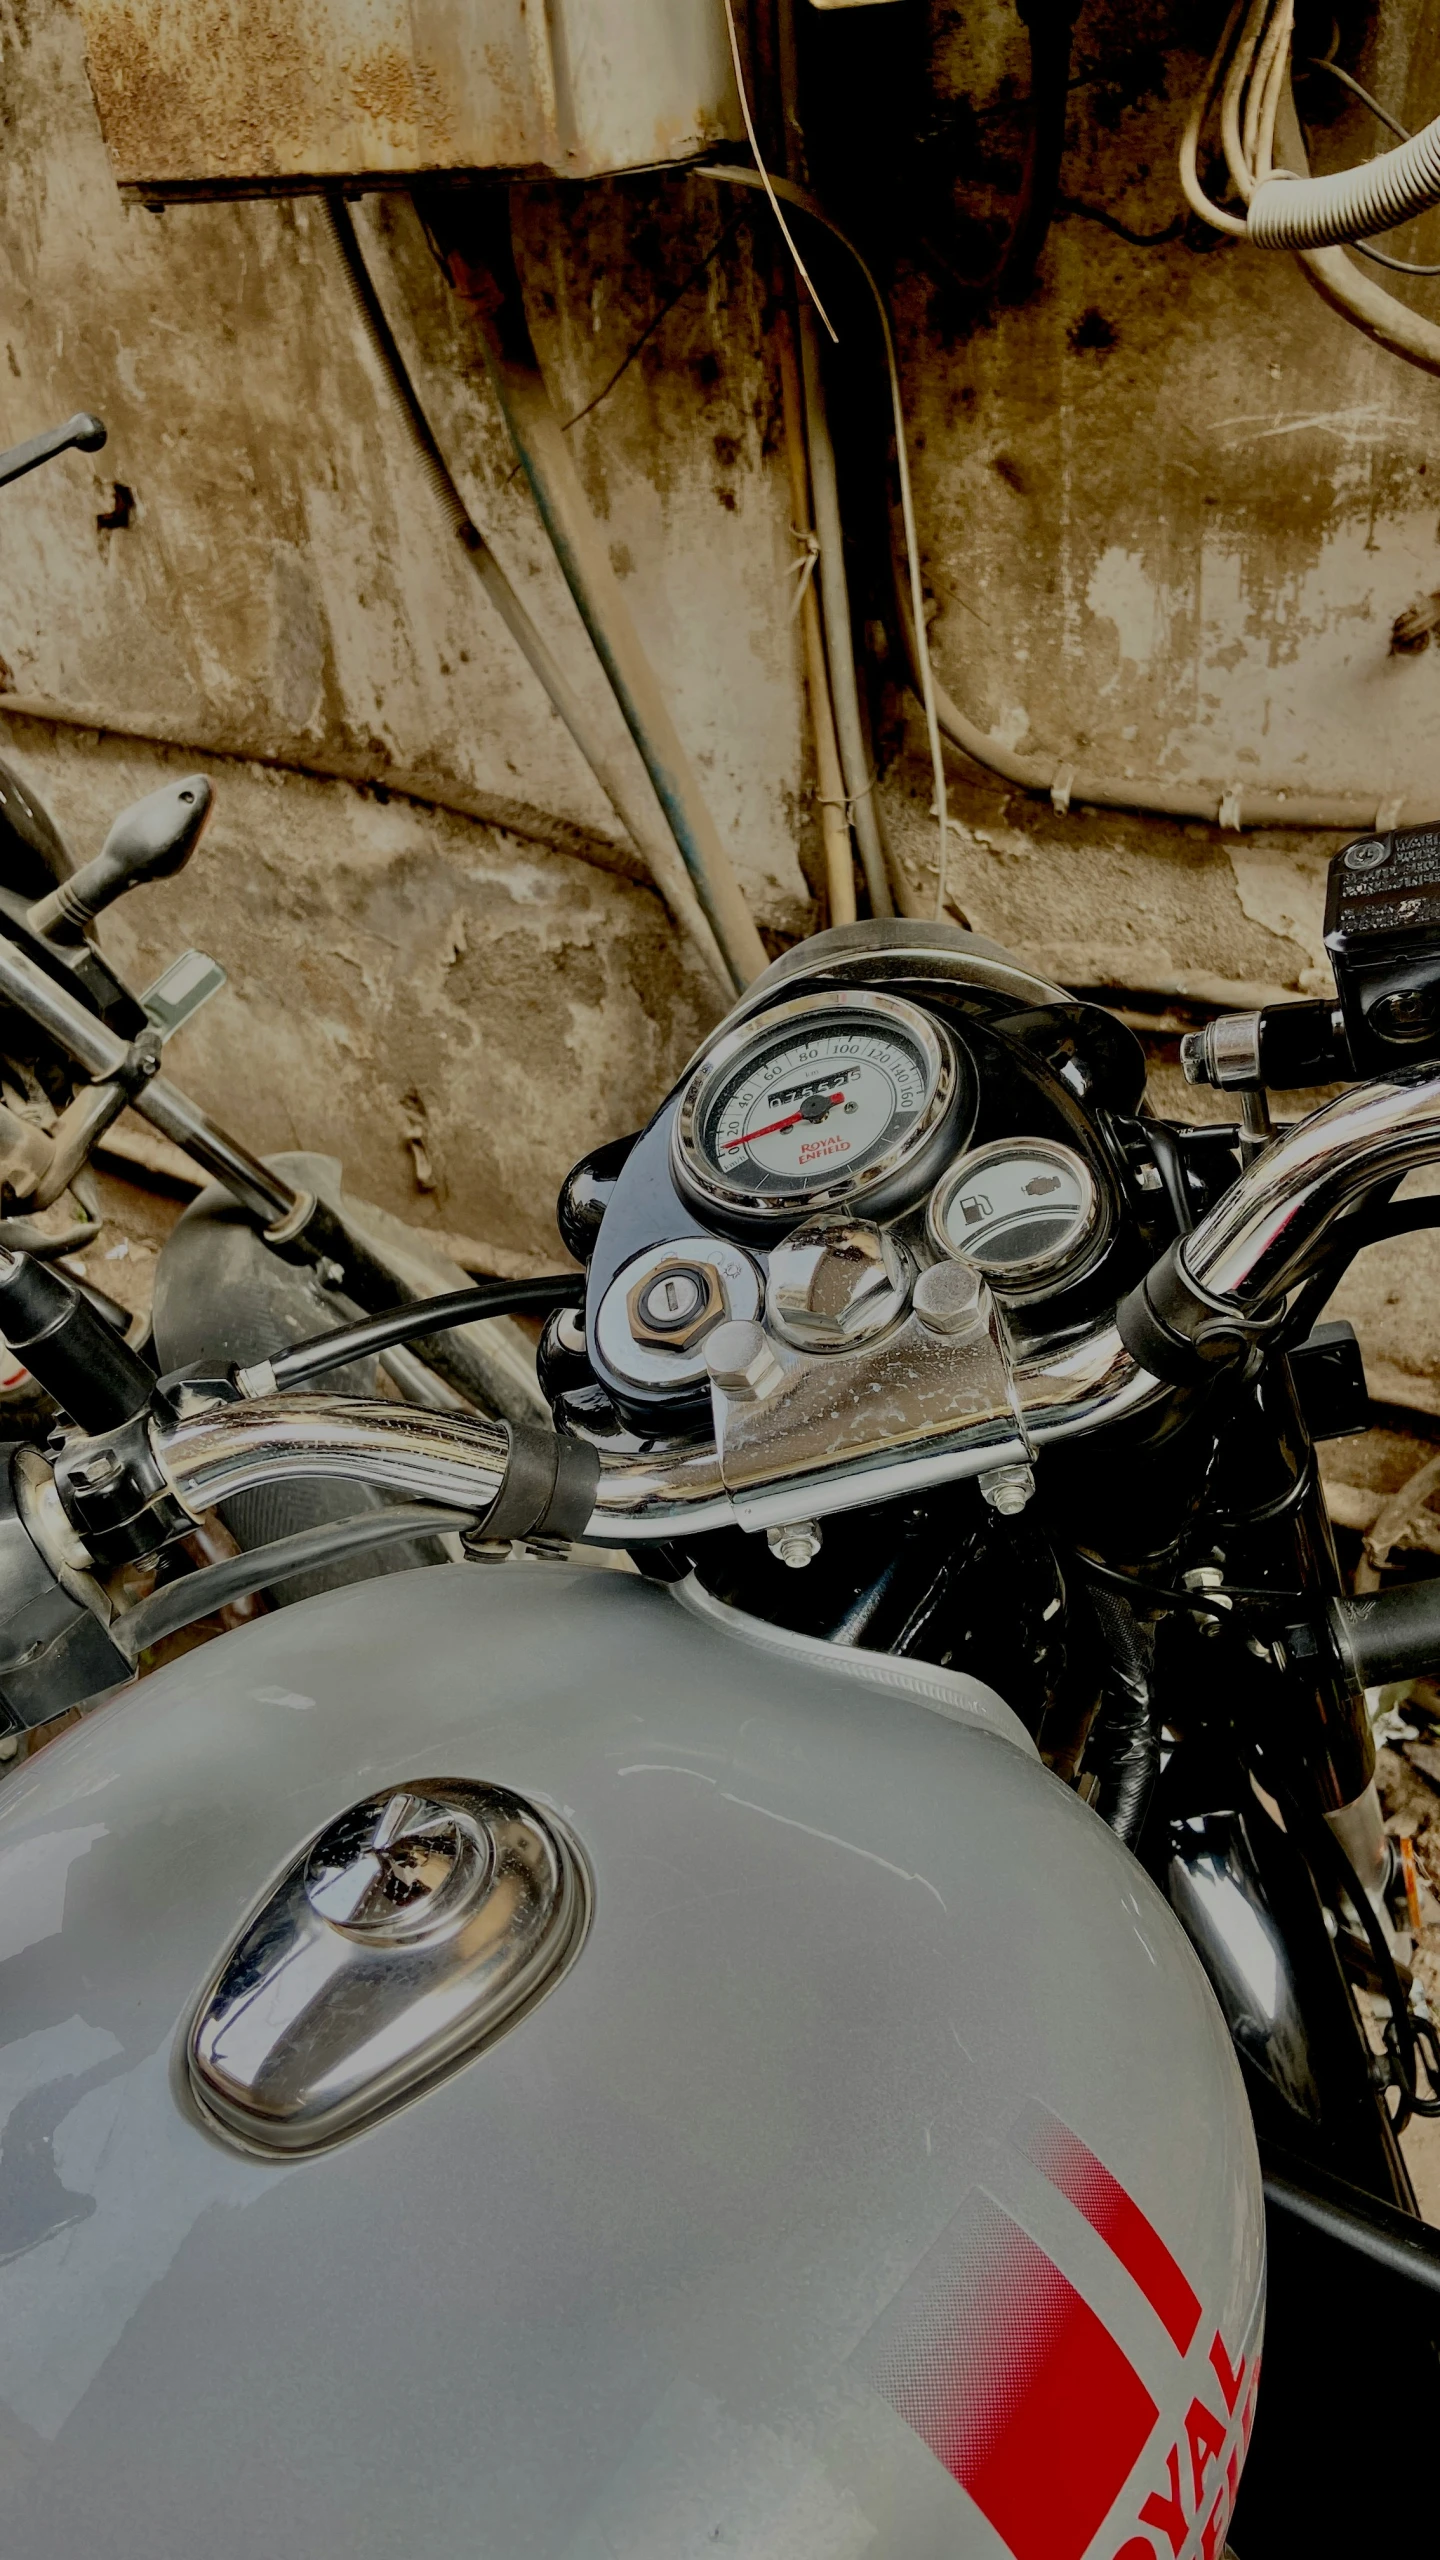 a close - up of the meter and the seat on a motorcycle